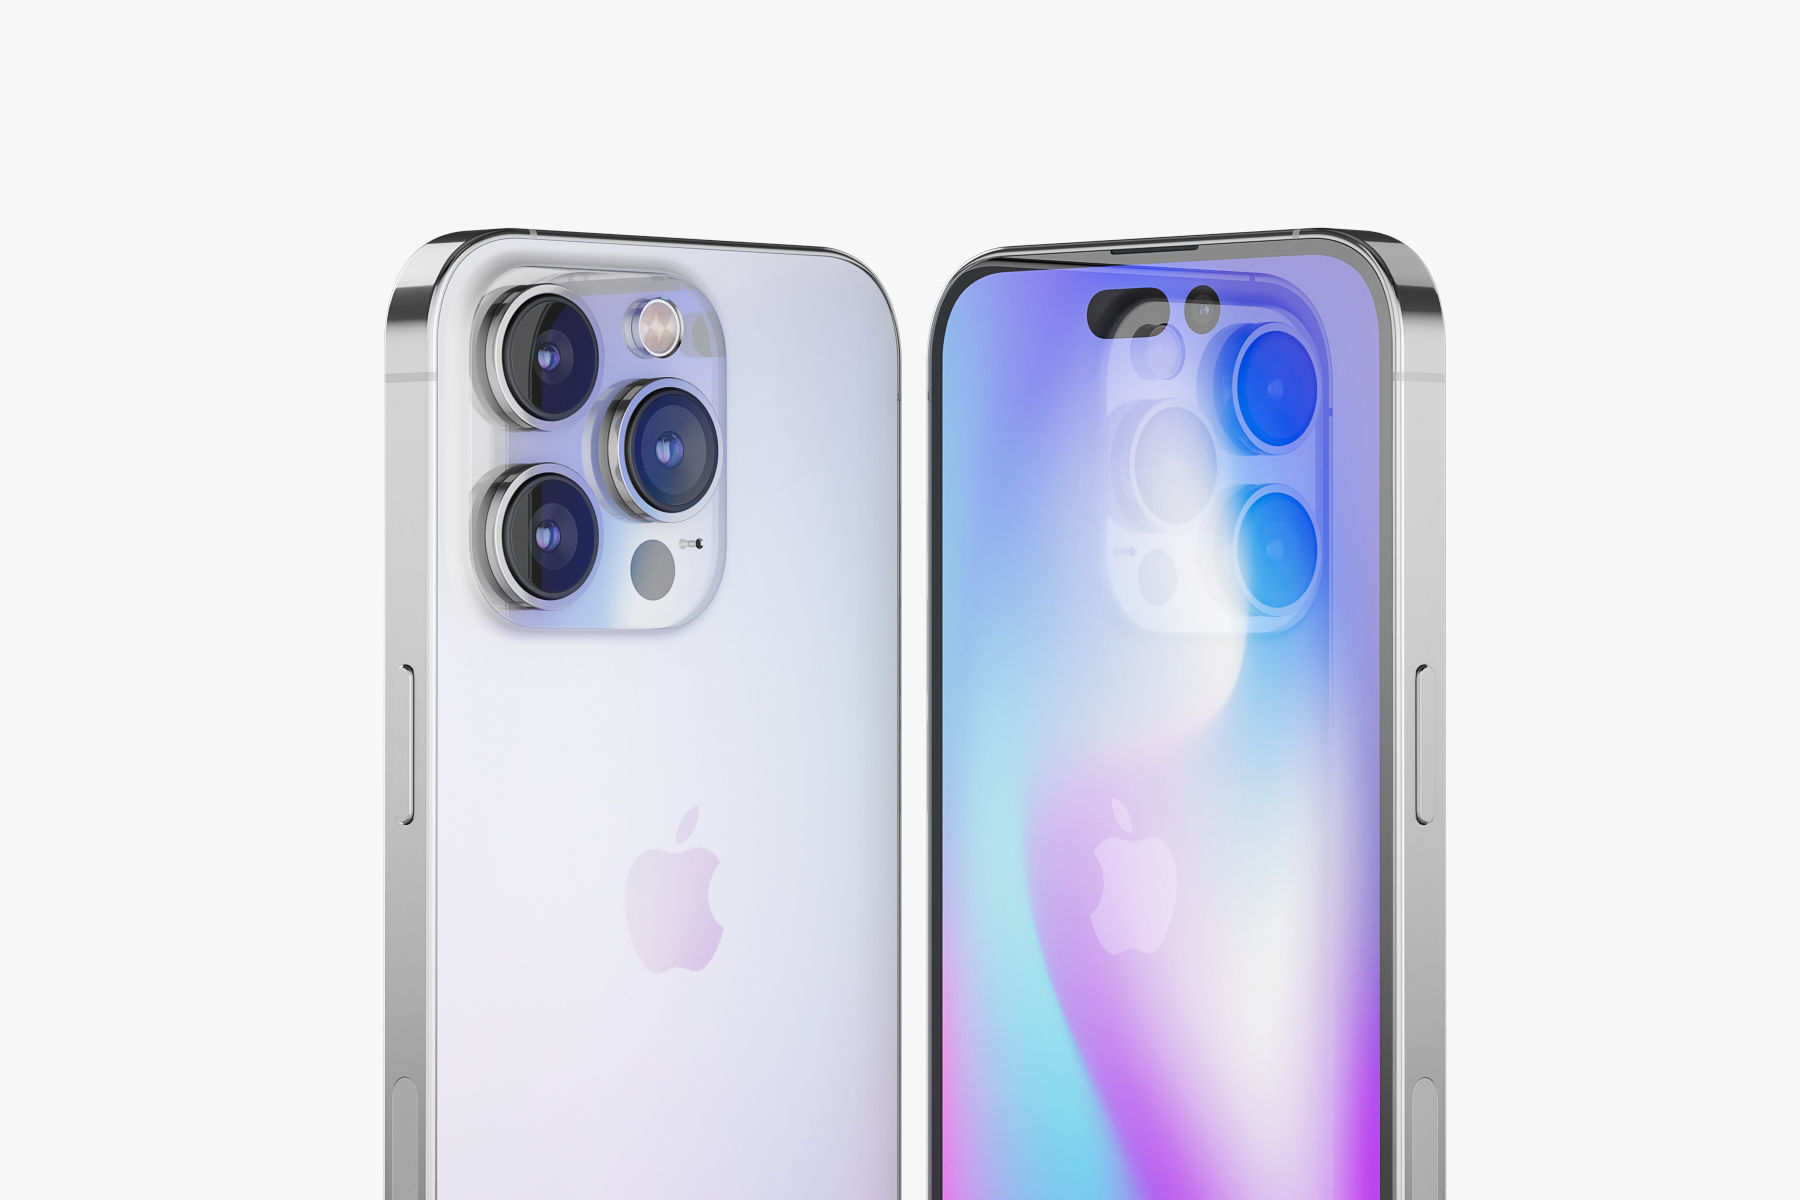 Front and back renders of the new iPhone 14 Pro Max